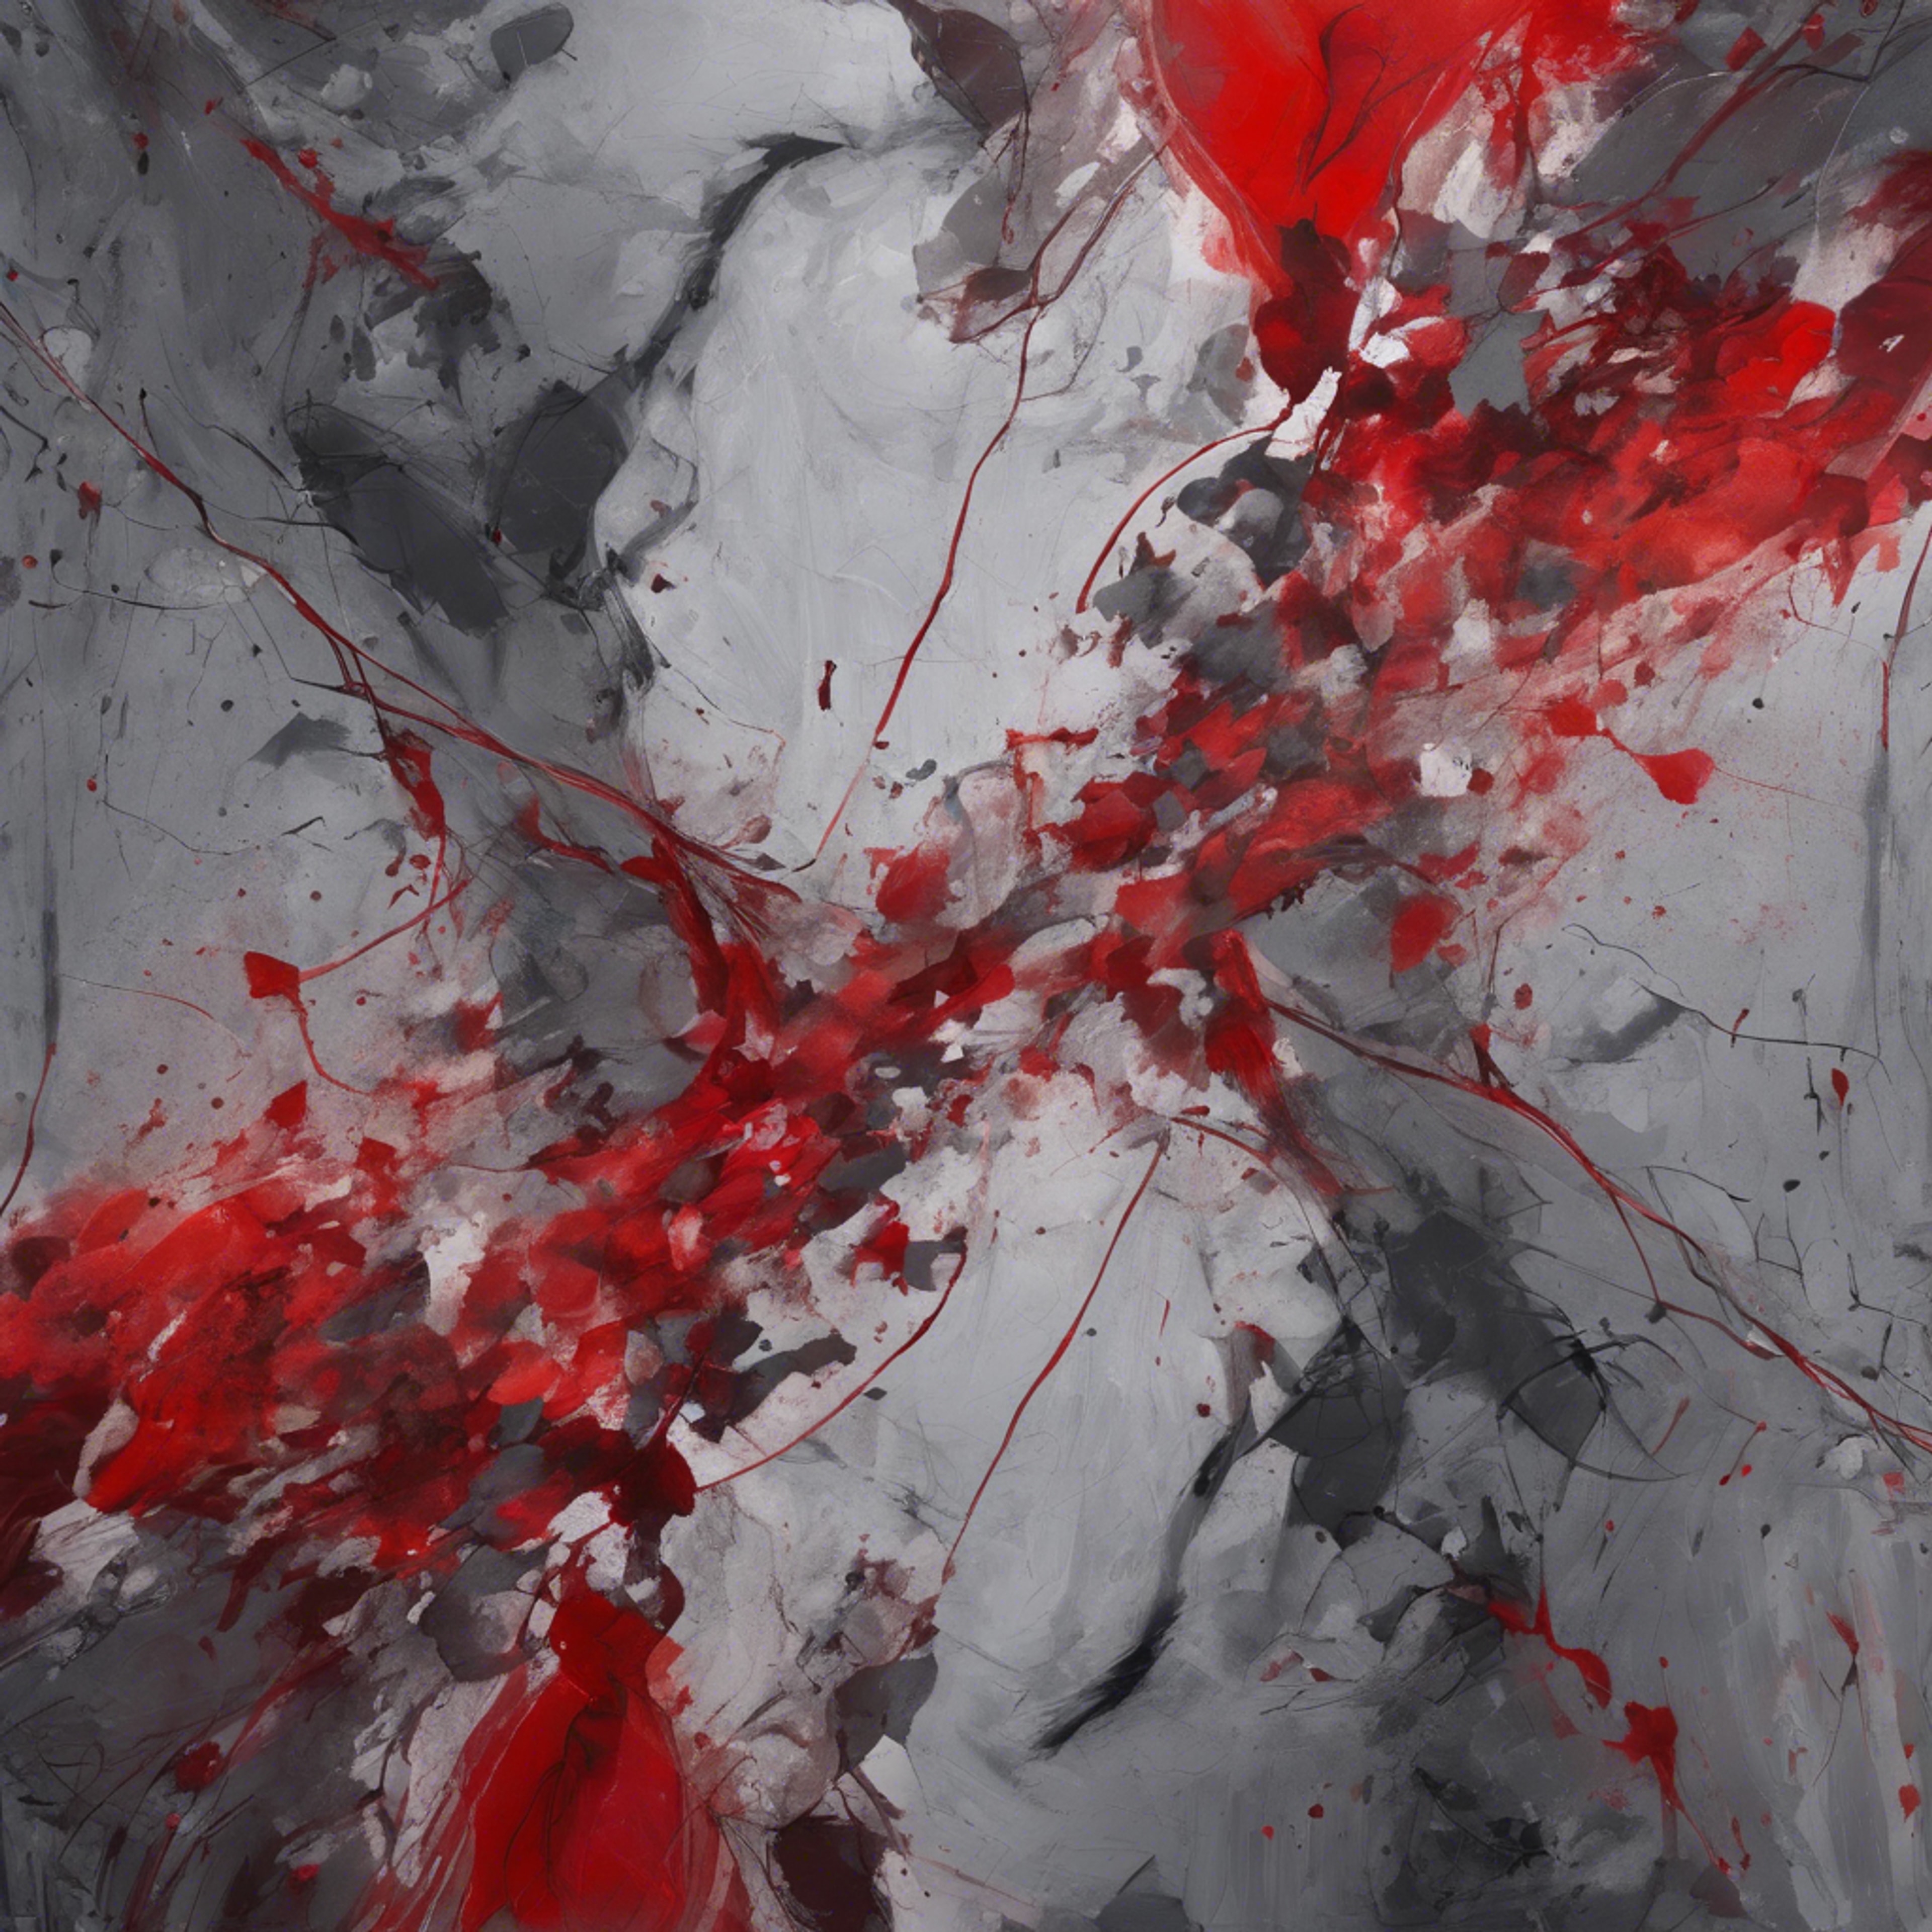 A red and gray abstract painting demonstrating the battle between passion and reason. טפט[fb490a5db02d428289d0]